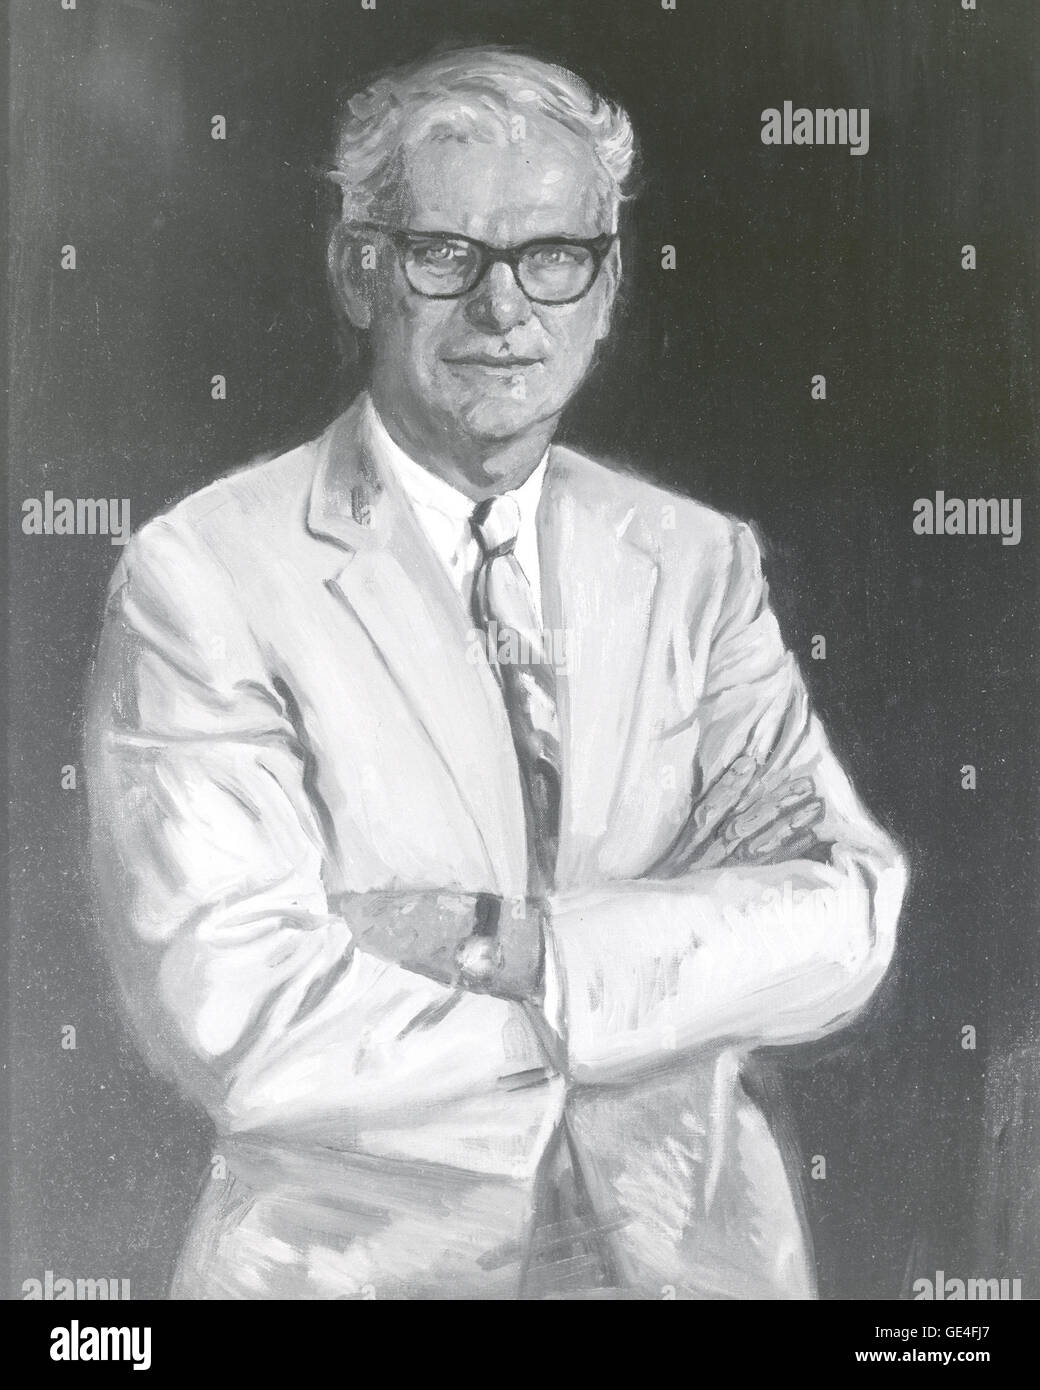 Dr. Robert C. Seamans, Jr., served as NASA's Deputy Administrator from December 21, 1965, to January 5, 1968. Before becoming Deputy Administrator Dr. Seamans was NASA's Associate Administrator for five years. Prior to joining NASA, Dr. Seamans was on a National Advisory Committee for Aeronautics (NACA) technical committee. Dr. Seamans had a long working relationship with MIT, where he received his master and doctorate degrees, working as a researcher and professor before his federal service and after his retirement from NASA.  Image # : seamans01 Stock Photo